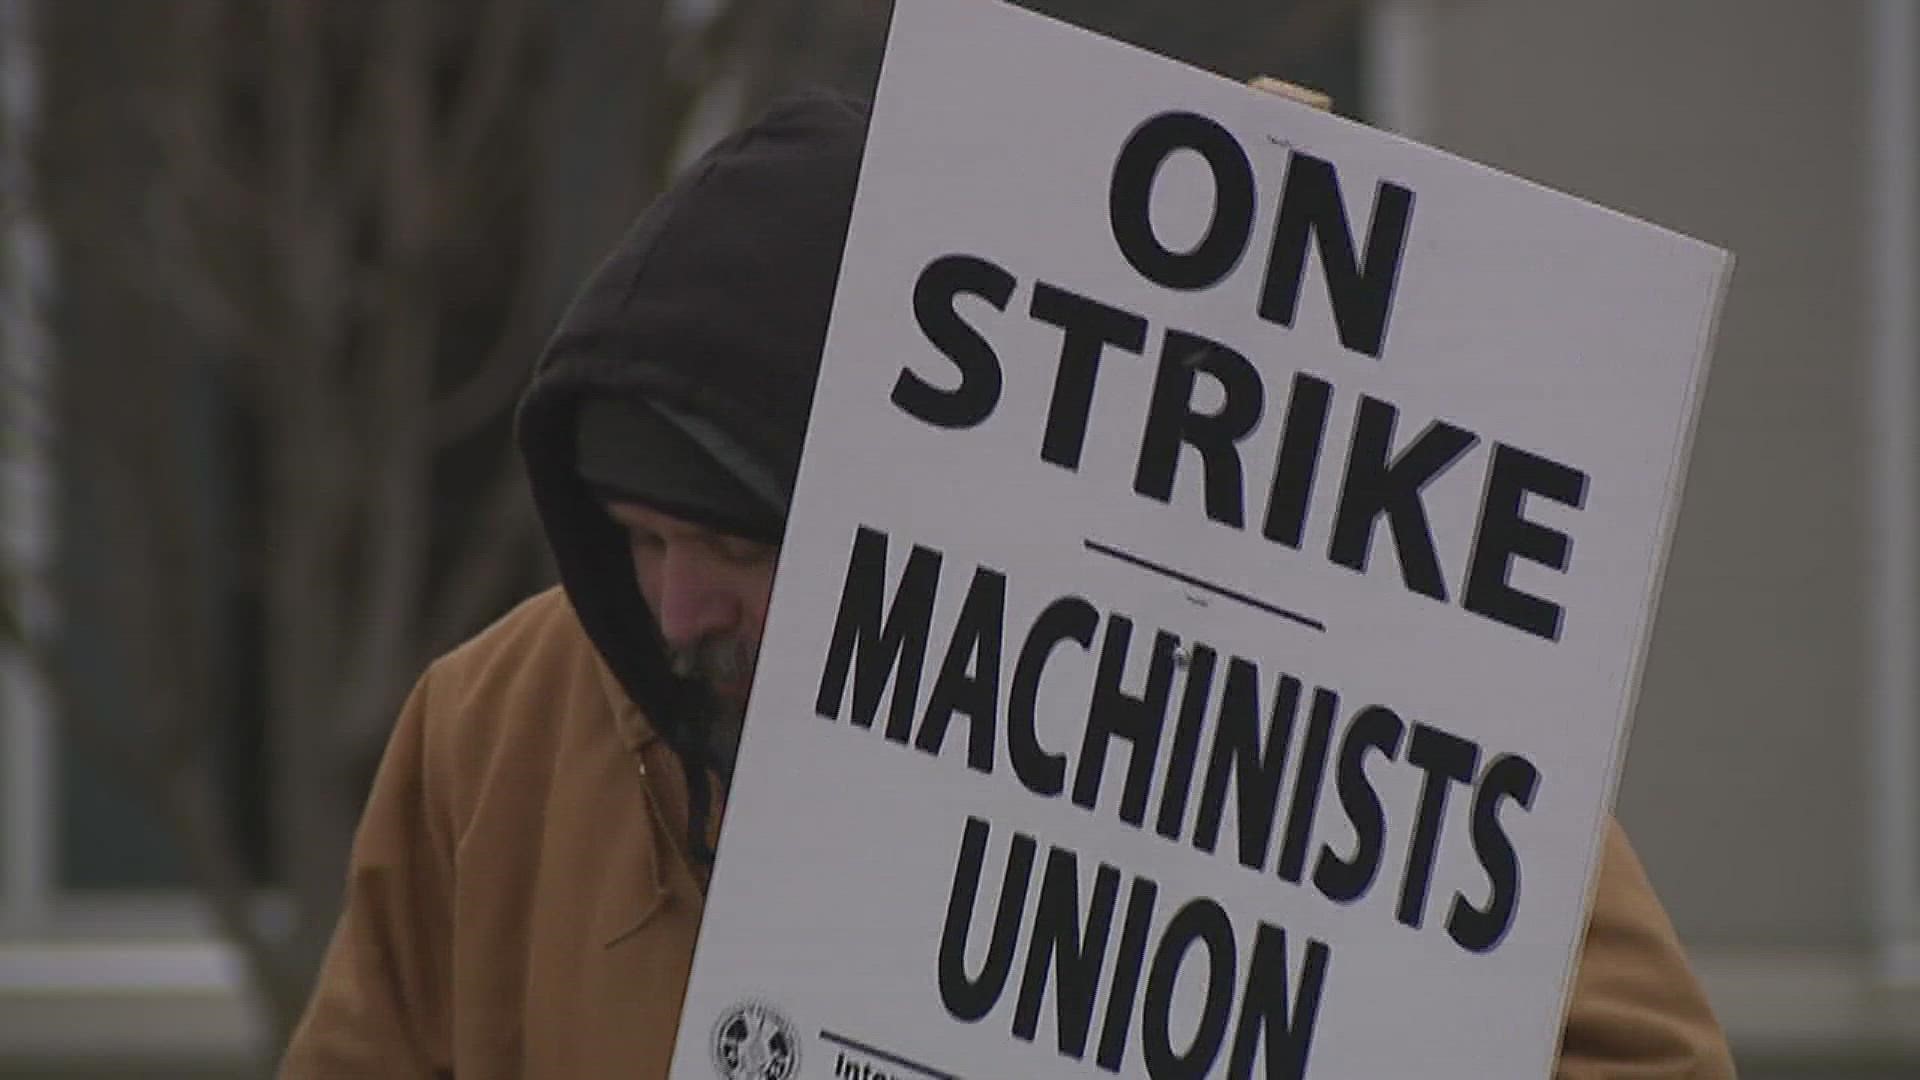 The union says 97% of members voted against the second offer. A company rep. said the goal is still to reach an agreement on a new contract with the union members.